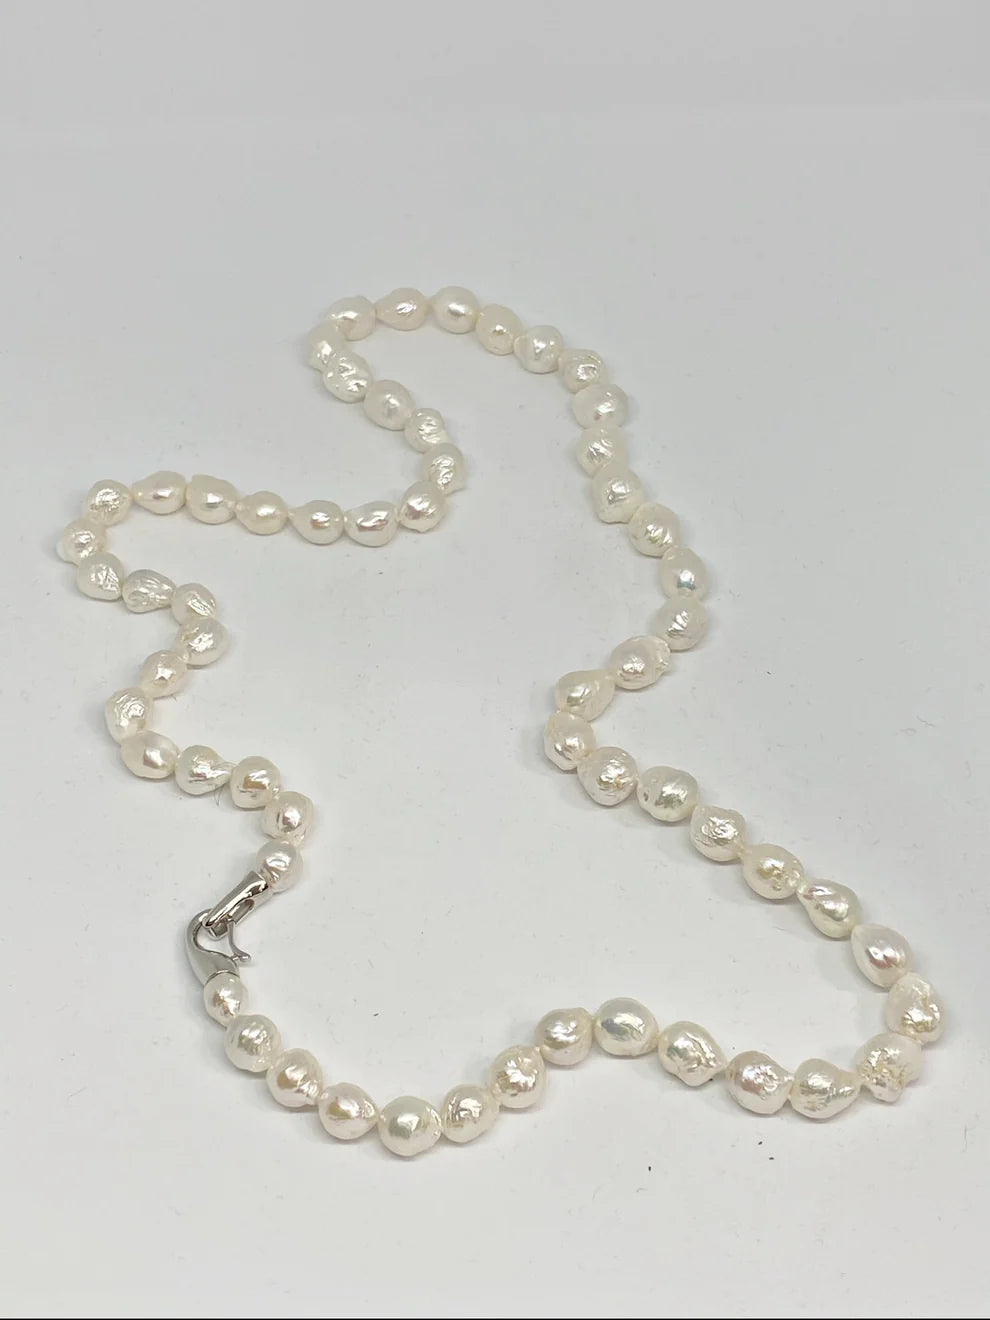 What Are The Different Types Of Pearls?